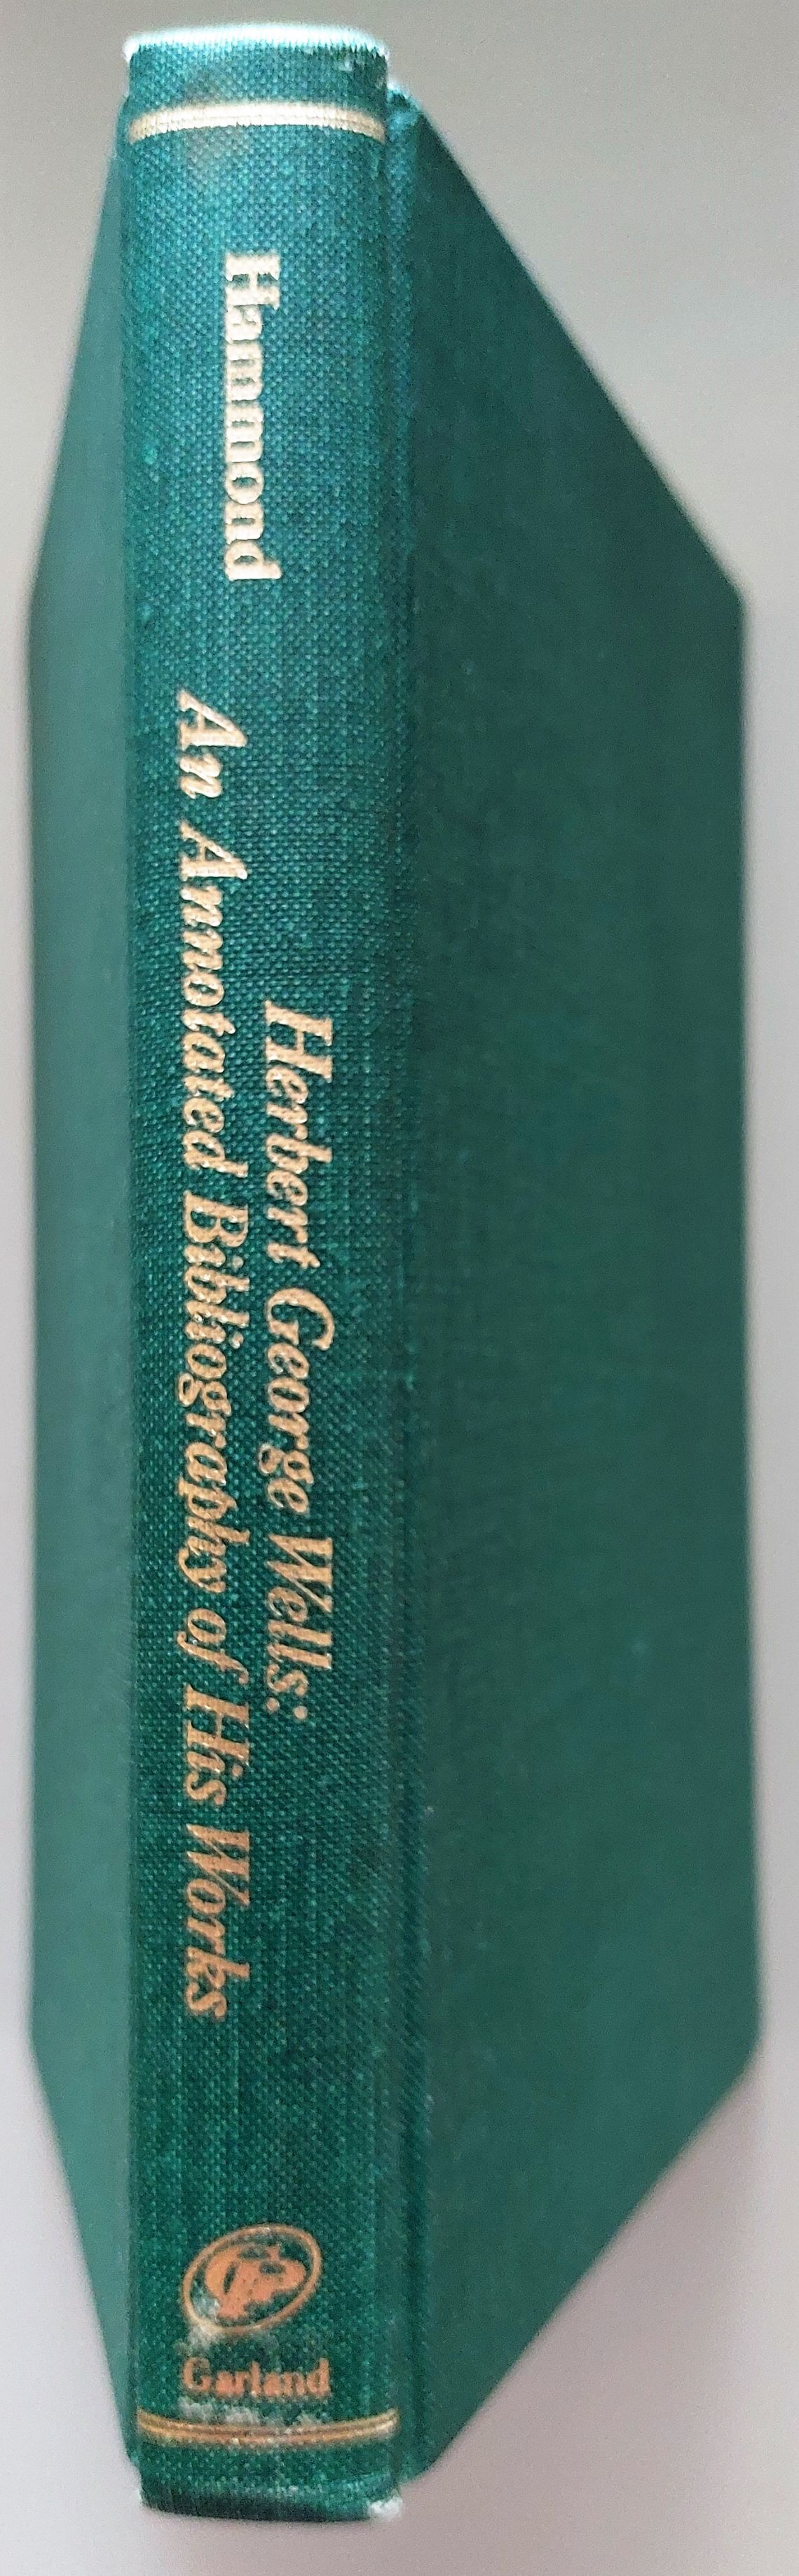 Herbert George Wells: An Annotated Bibliography of His Works - Hammond, J. R.